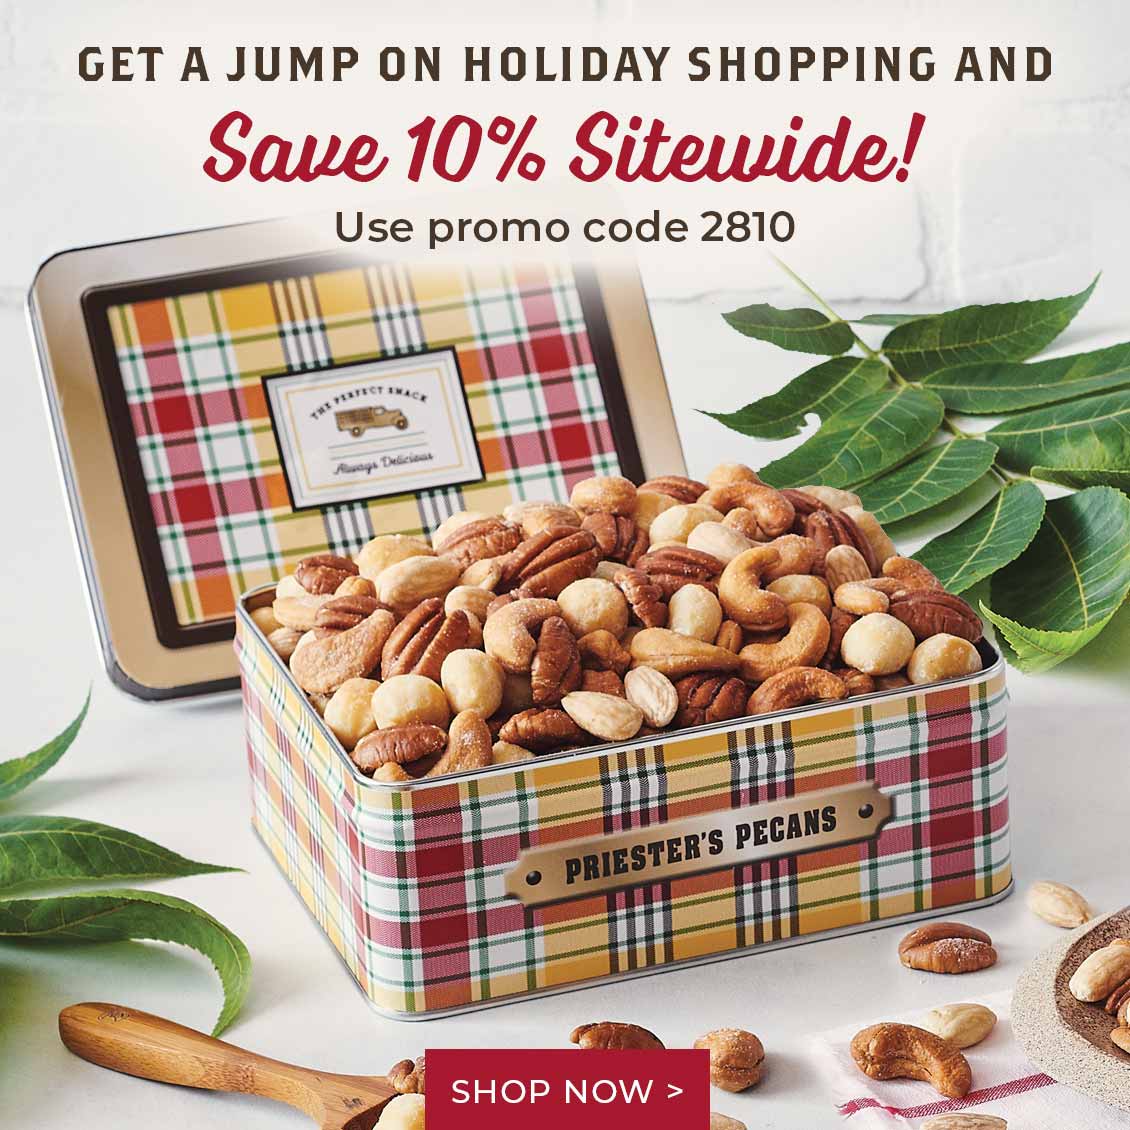 Get a Jump on Holiday Shopping and Save 10% Sitewide! Use Promo Code 2810